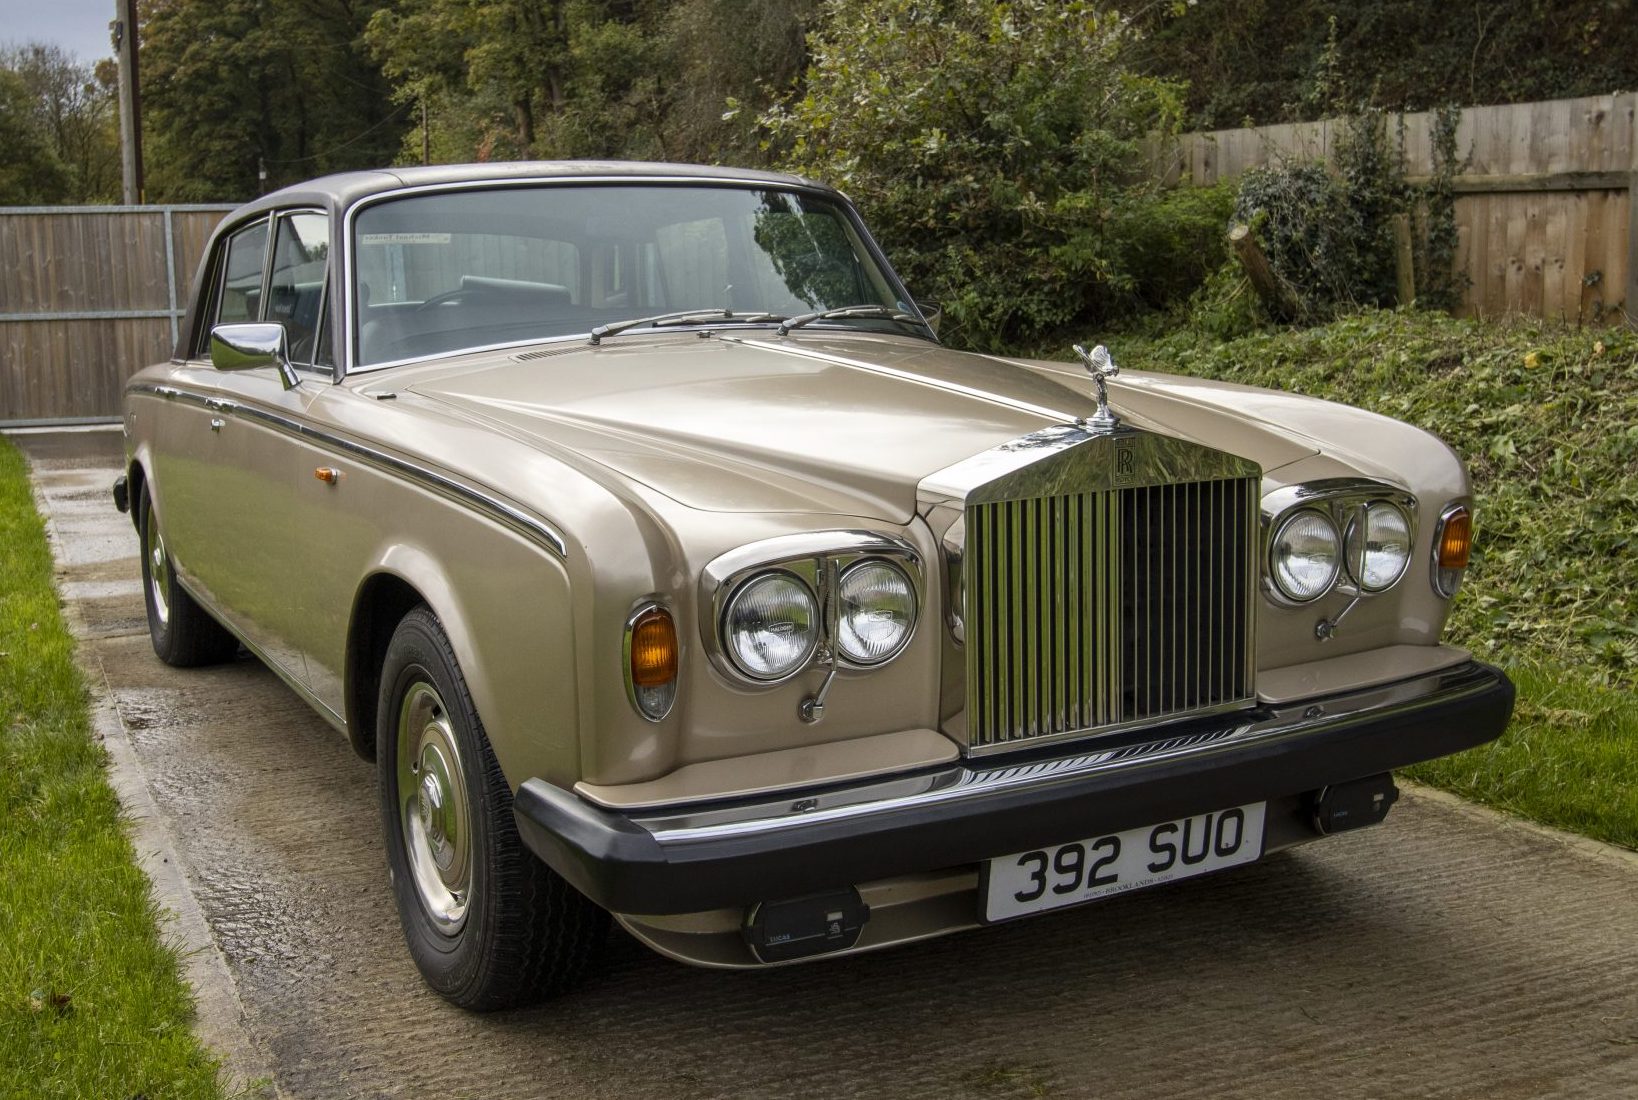 1977 RollsRoyce Silver Shadow II  Paradise Garage  Service and Parts for Rolls  Royce Bentley Jaguar and Aston Martin